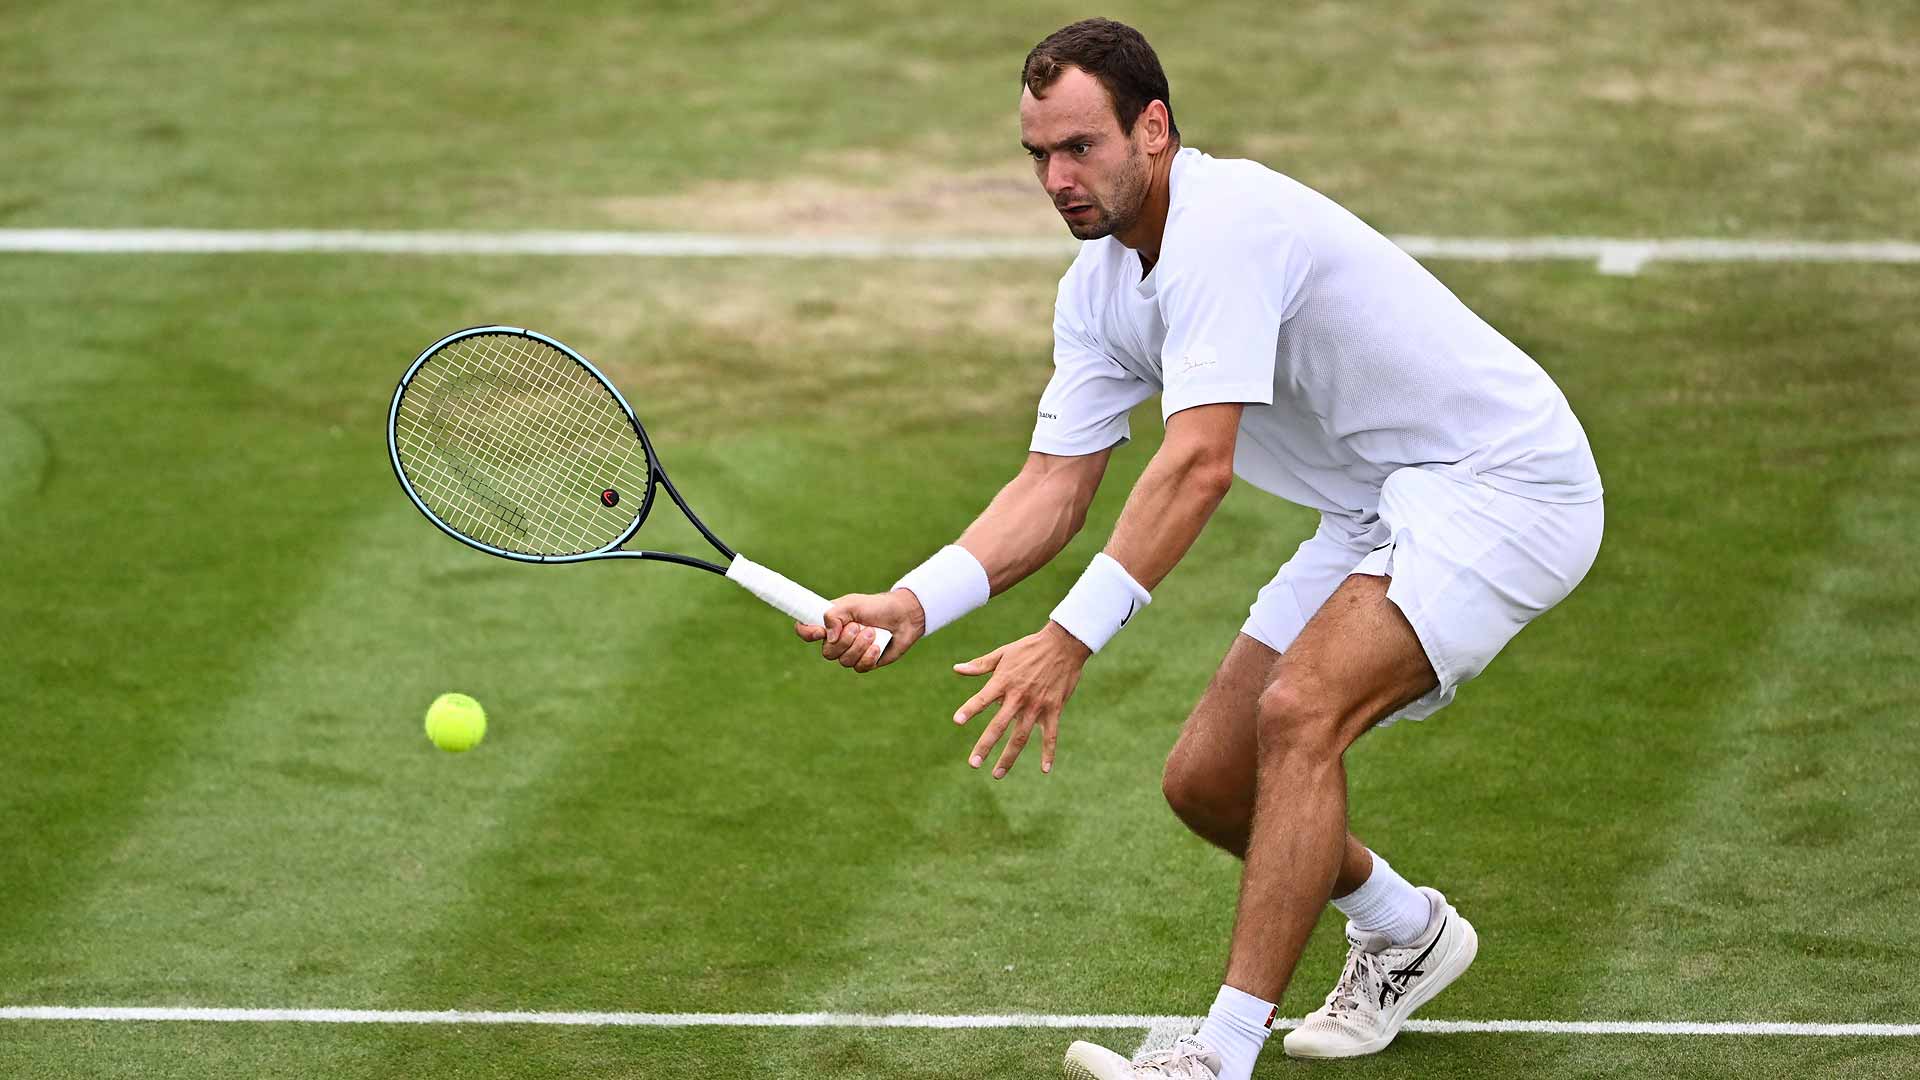 Roman Safiullin wins 18 of 23 points at the net en route to victory against Denis Shapovalov on Sunday at Wimbledon.